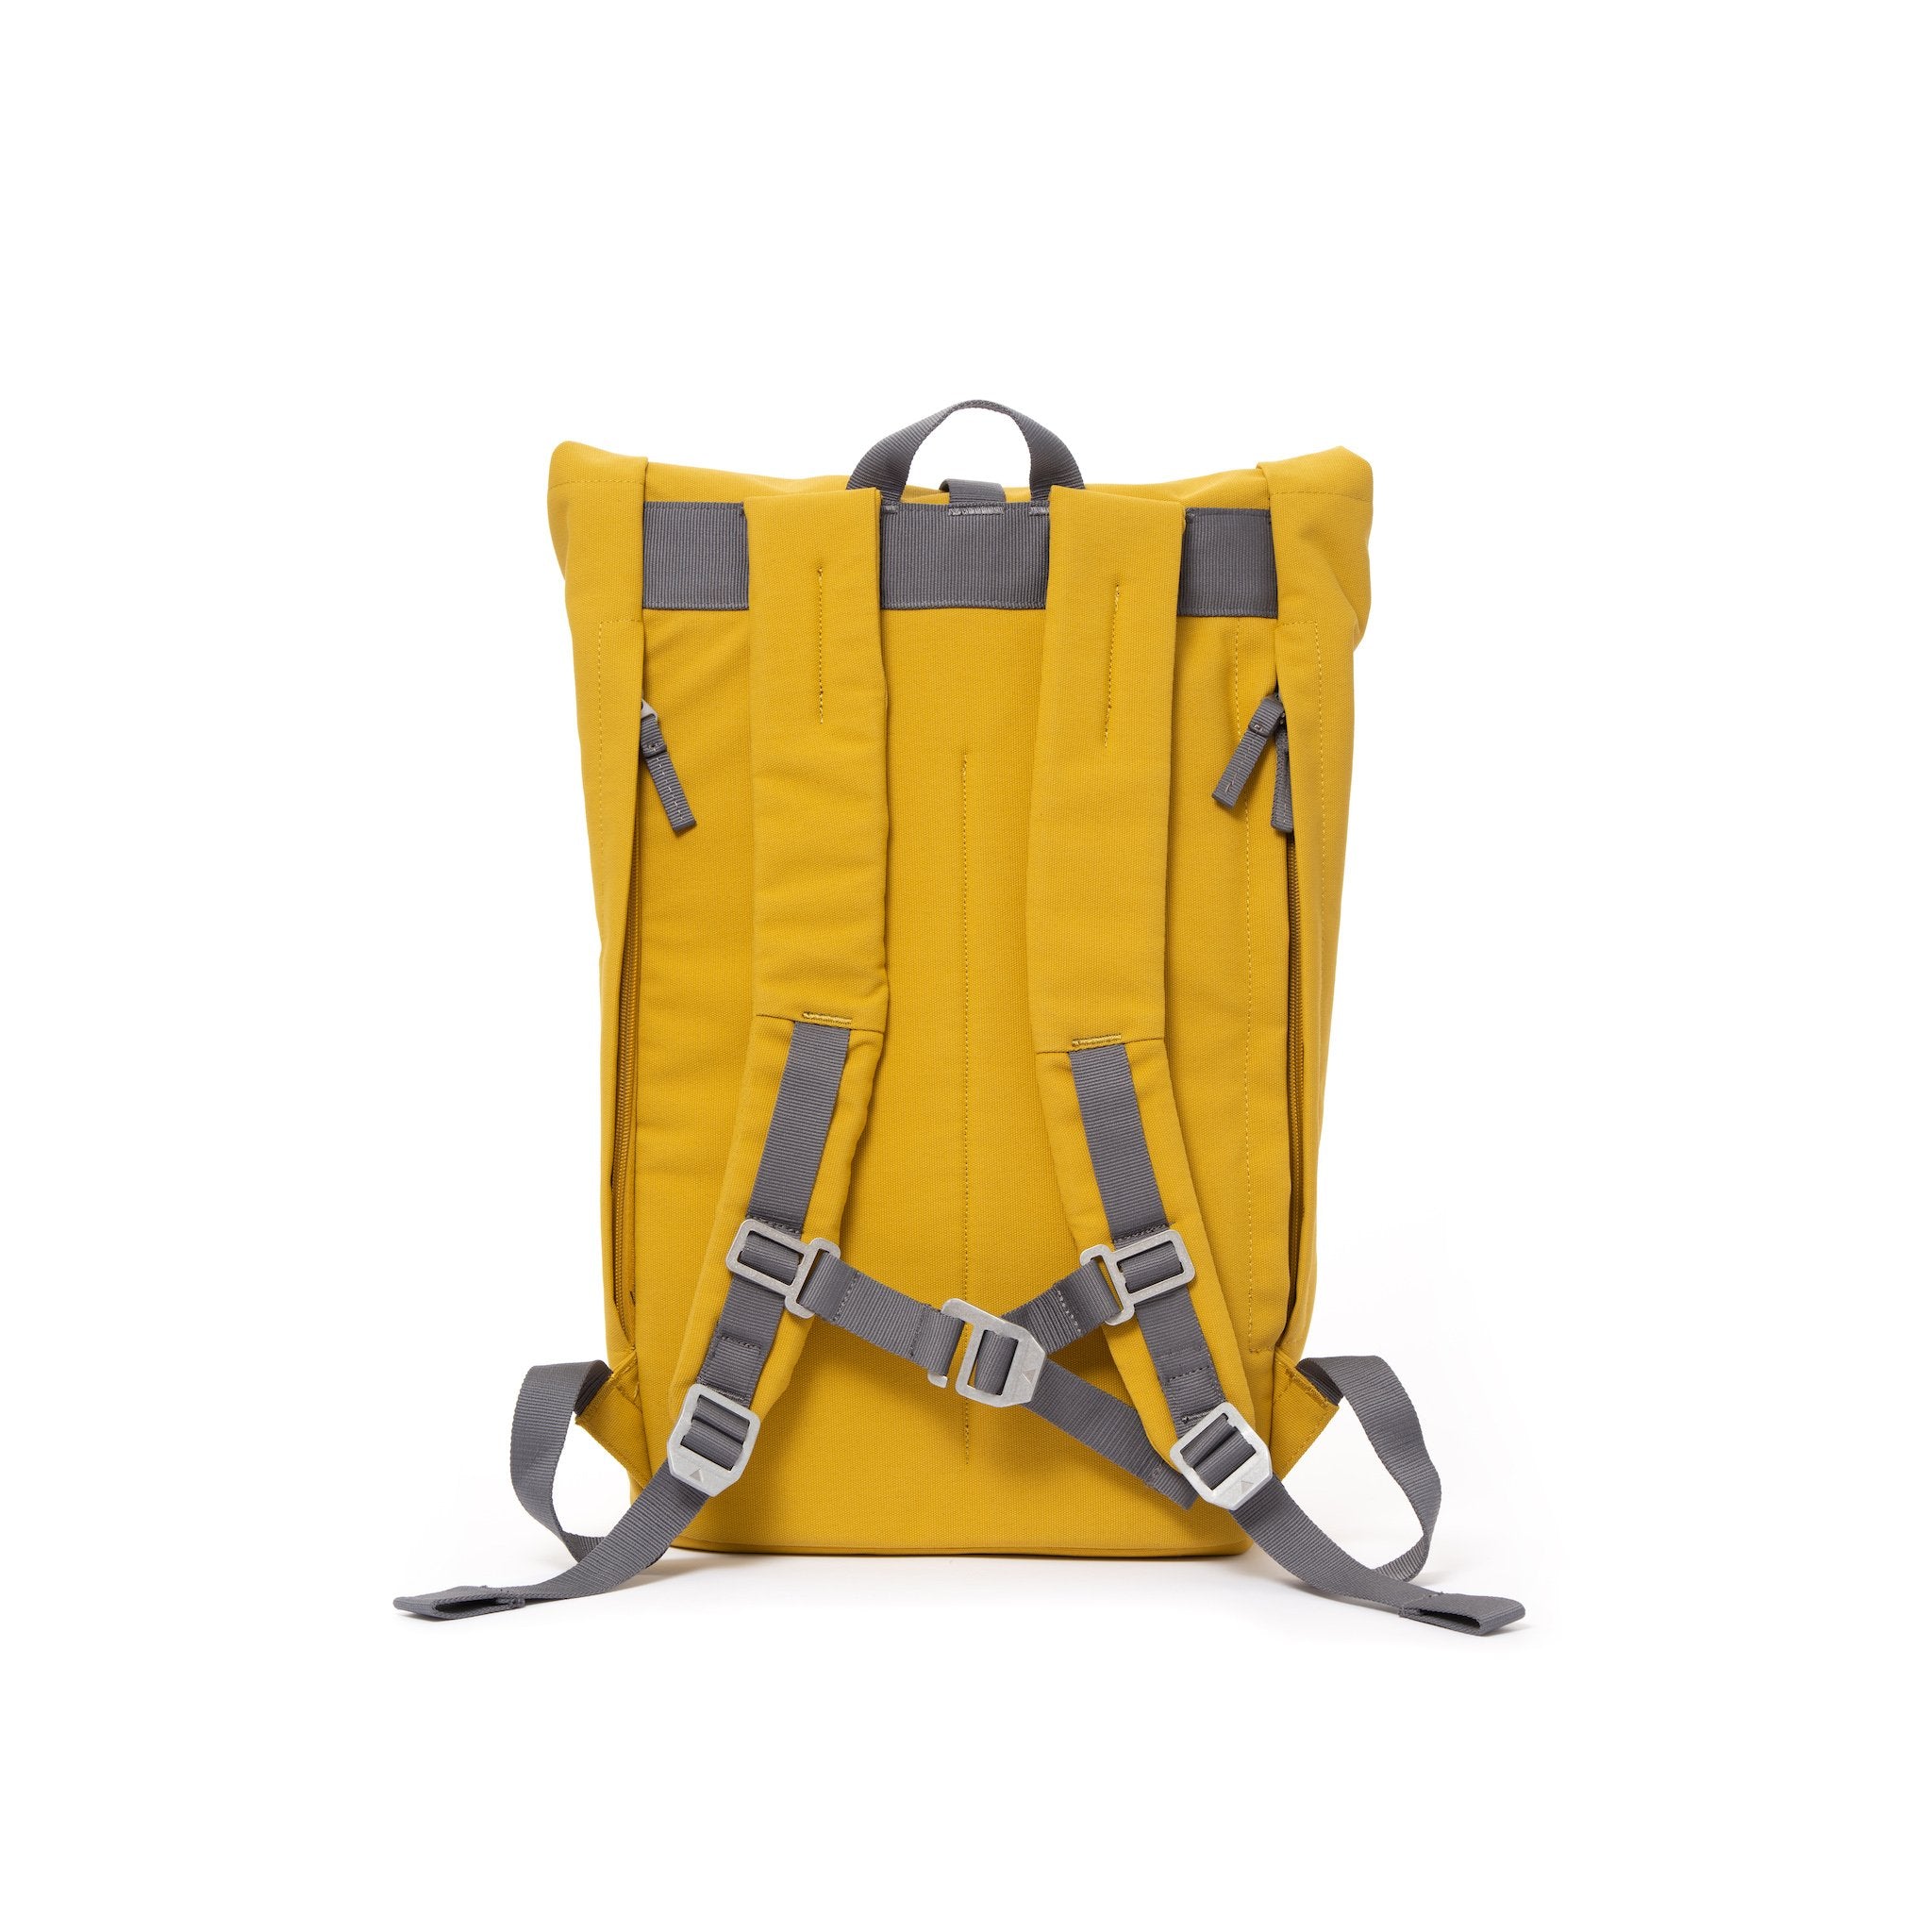 Yellow rolltop backpack with padded shoulder straps and chest strap.